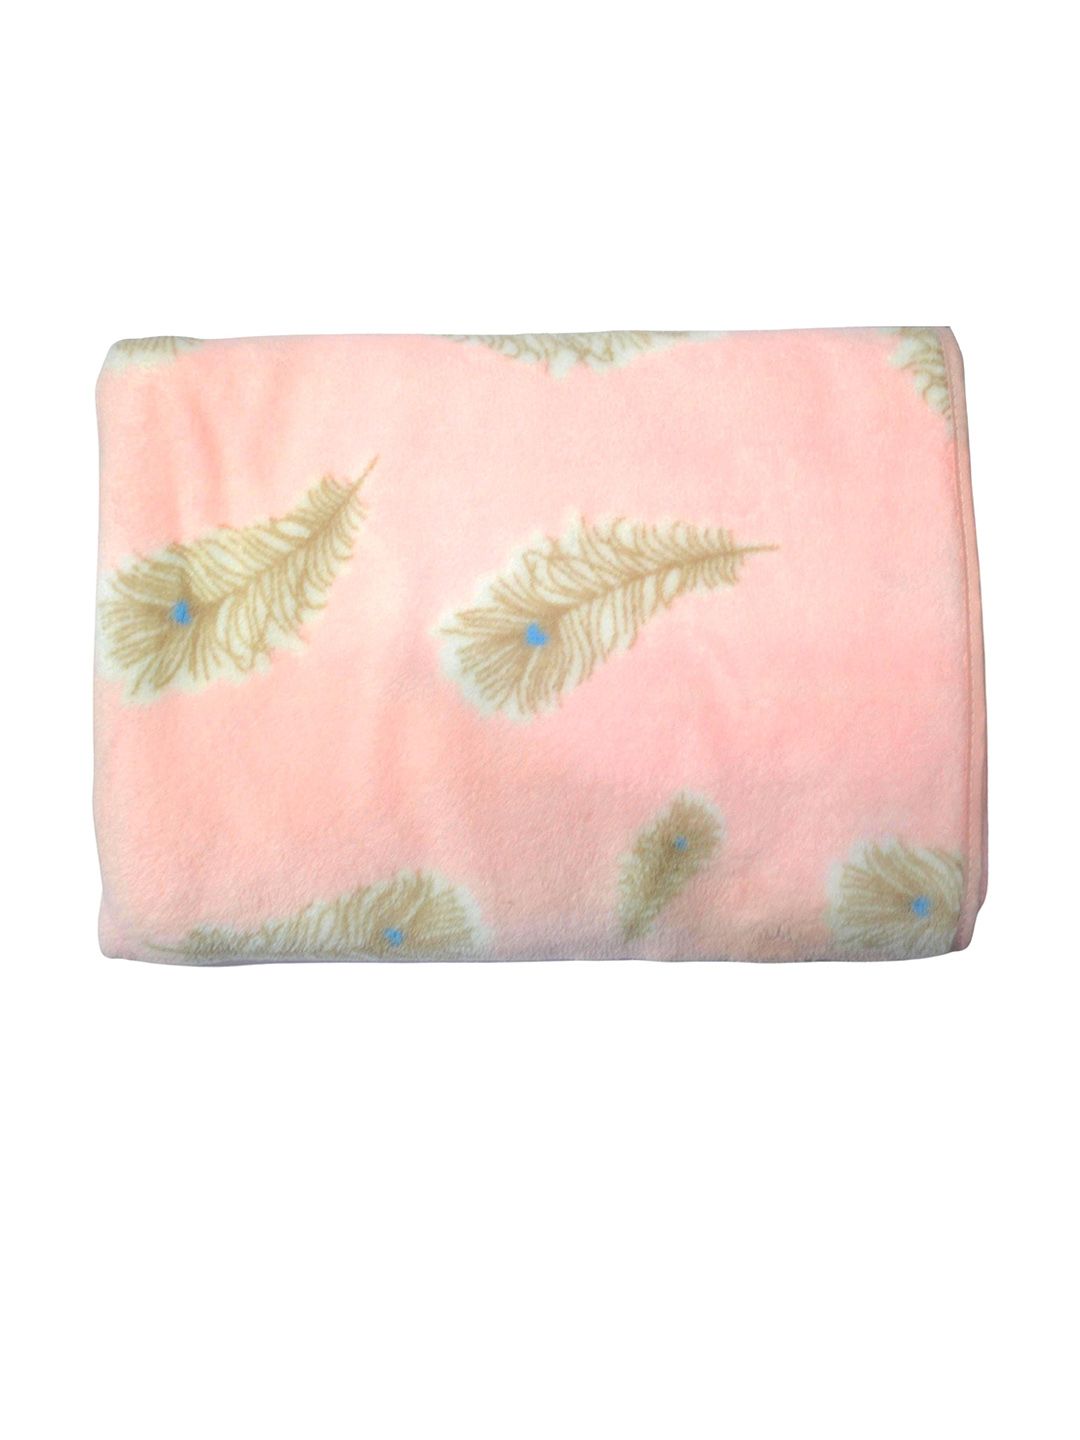 Tranquil square Pink Printed 650 GSM Cotton Bath Towel Price in India